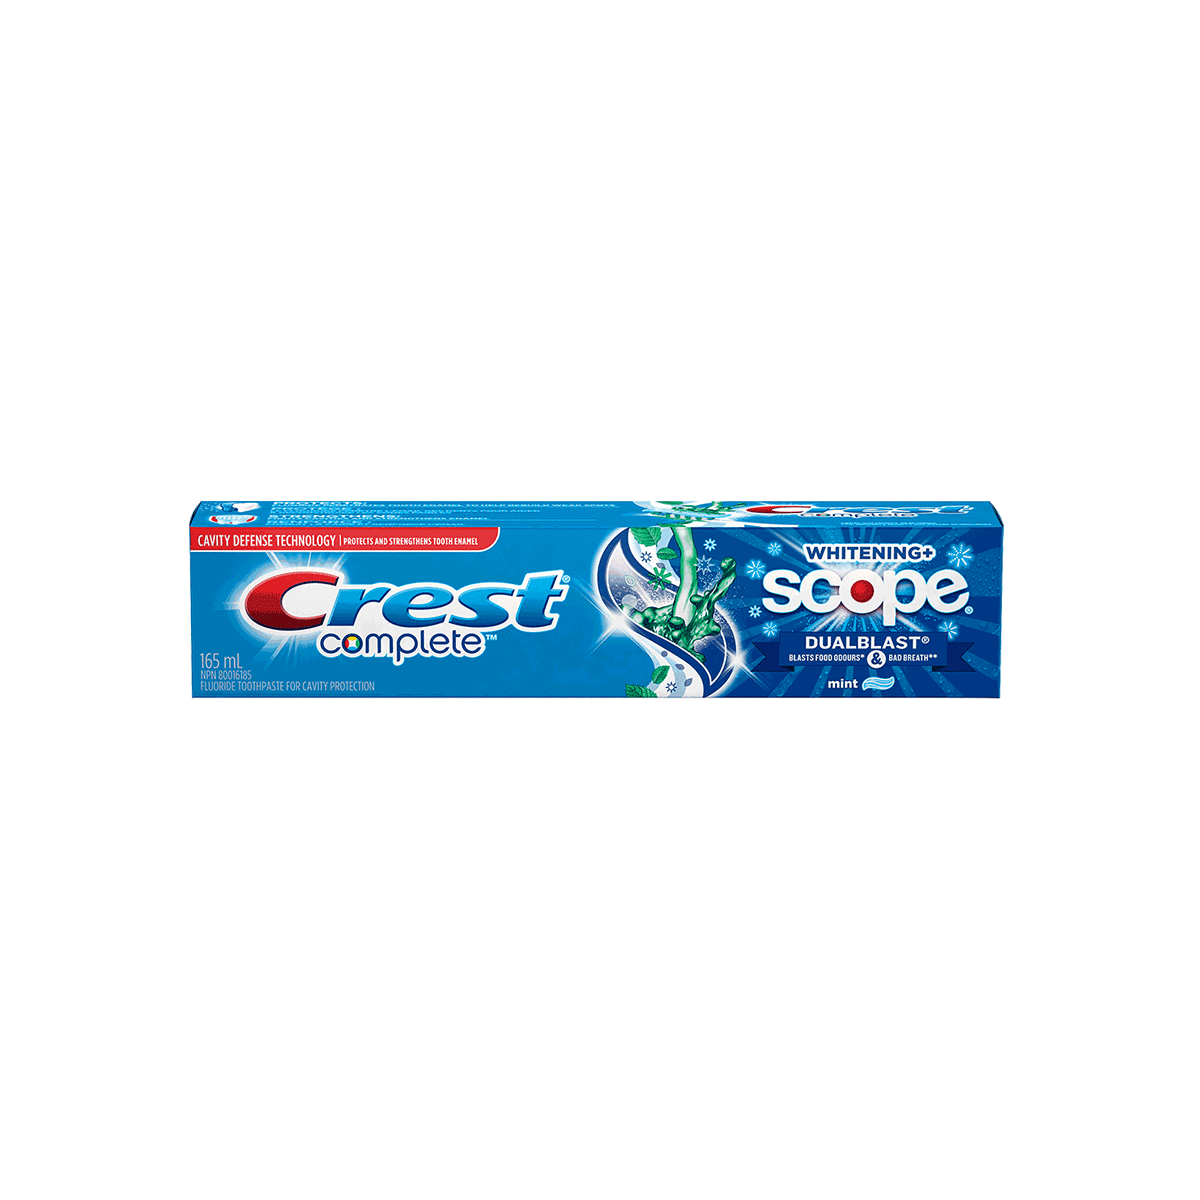 46.2-Crest-Complete-Extra-Whitening-plusScope-Dual-Blast-Toothpaste -1200x1200